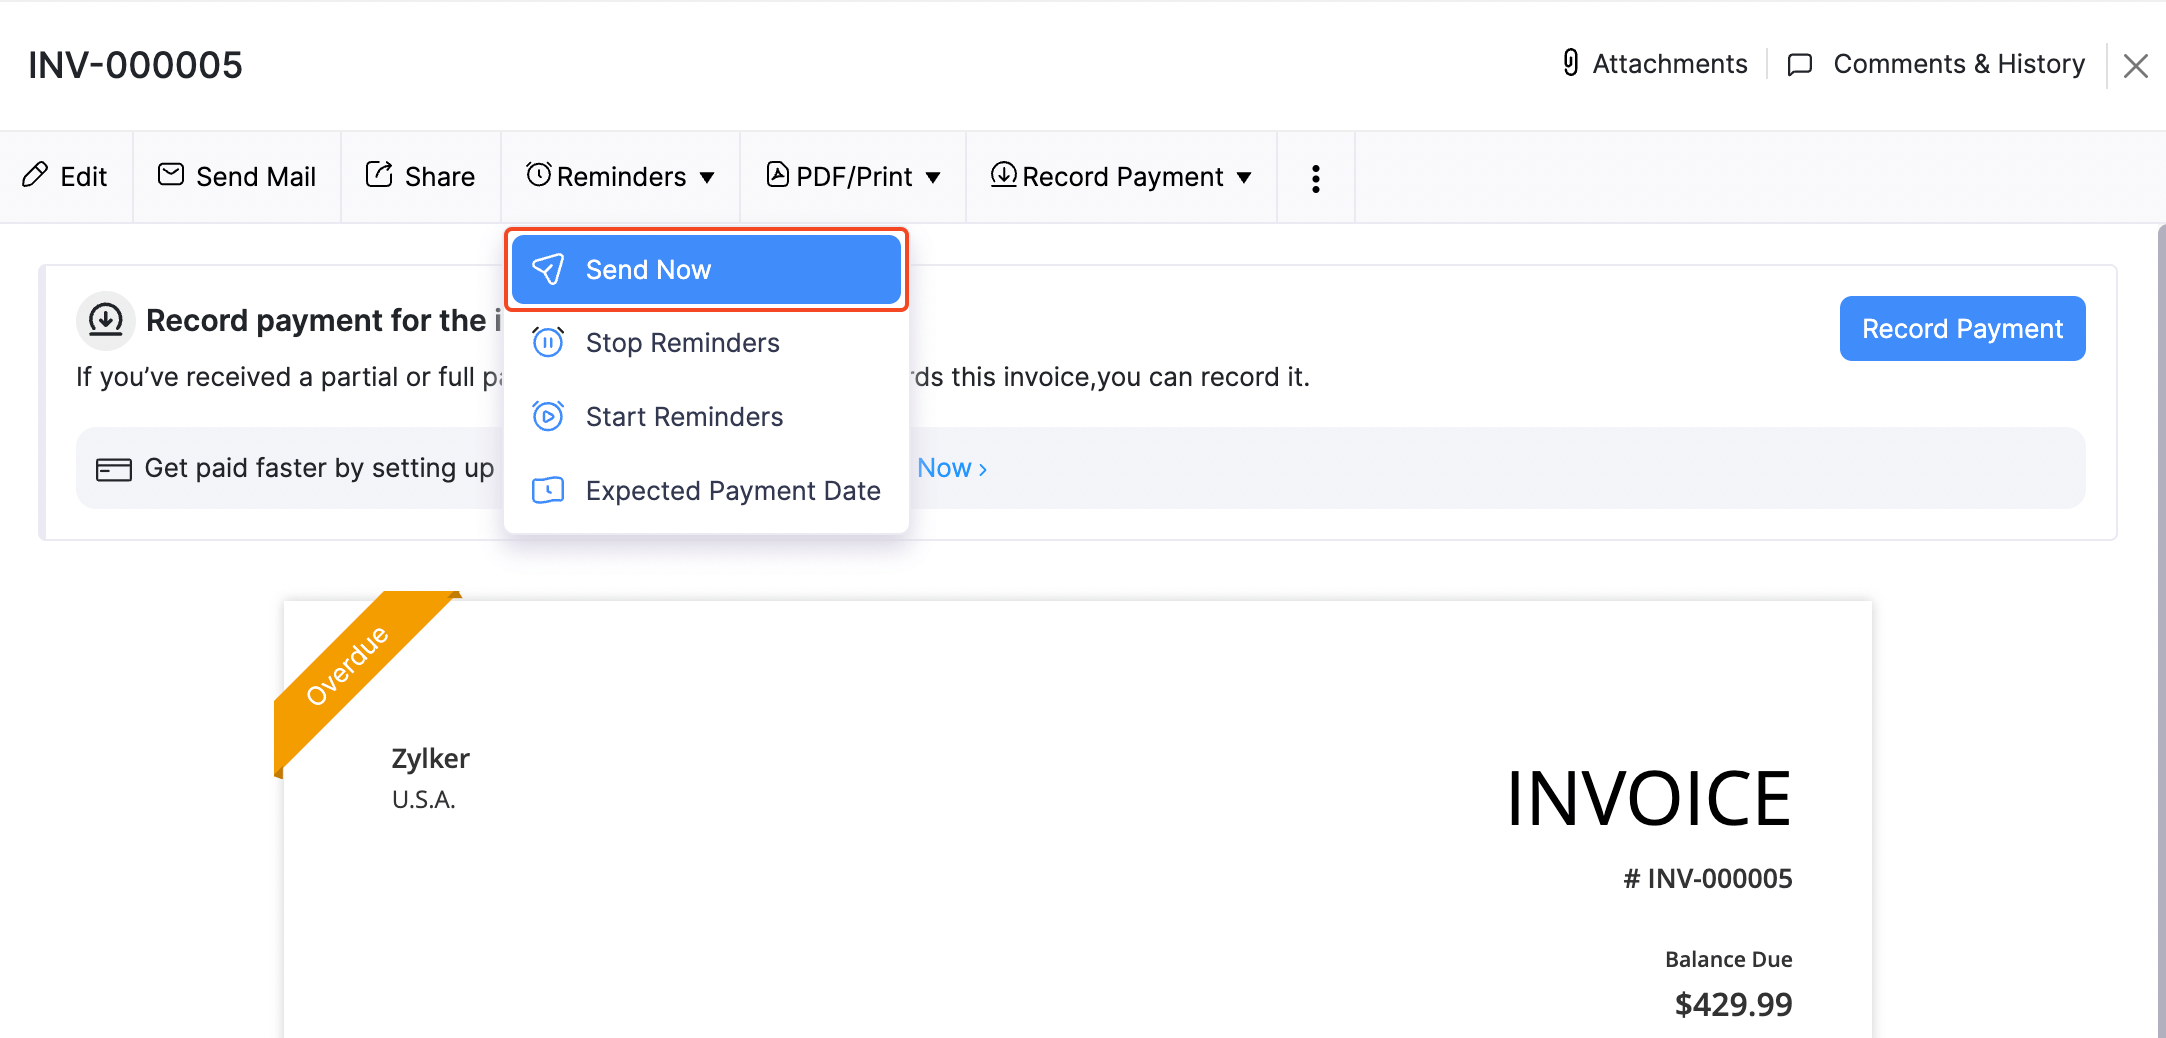 Invoices - Send Reminders